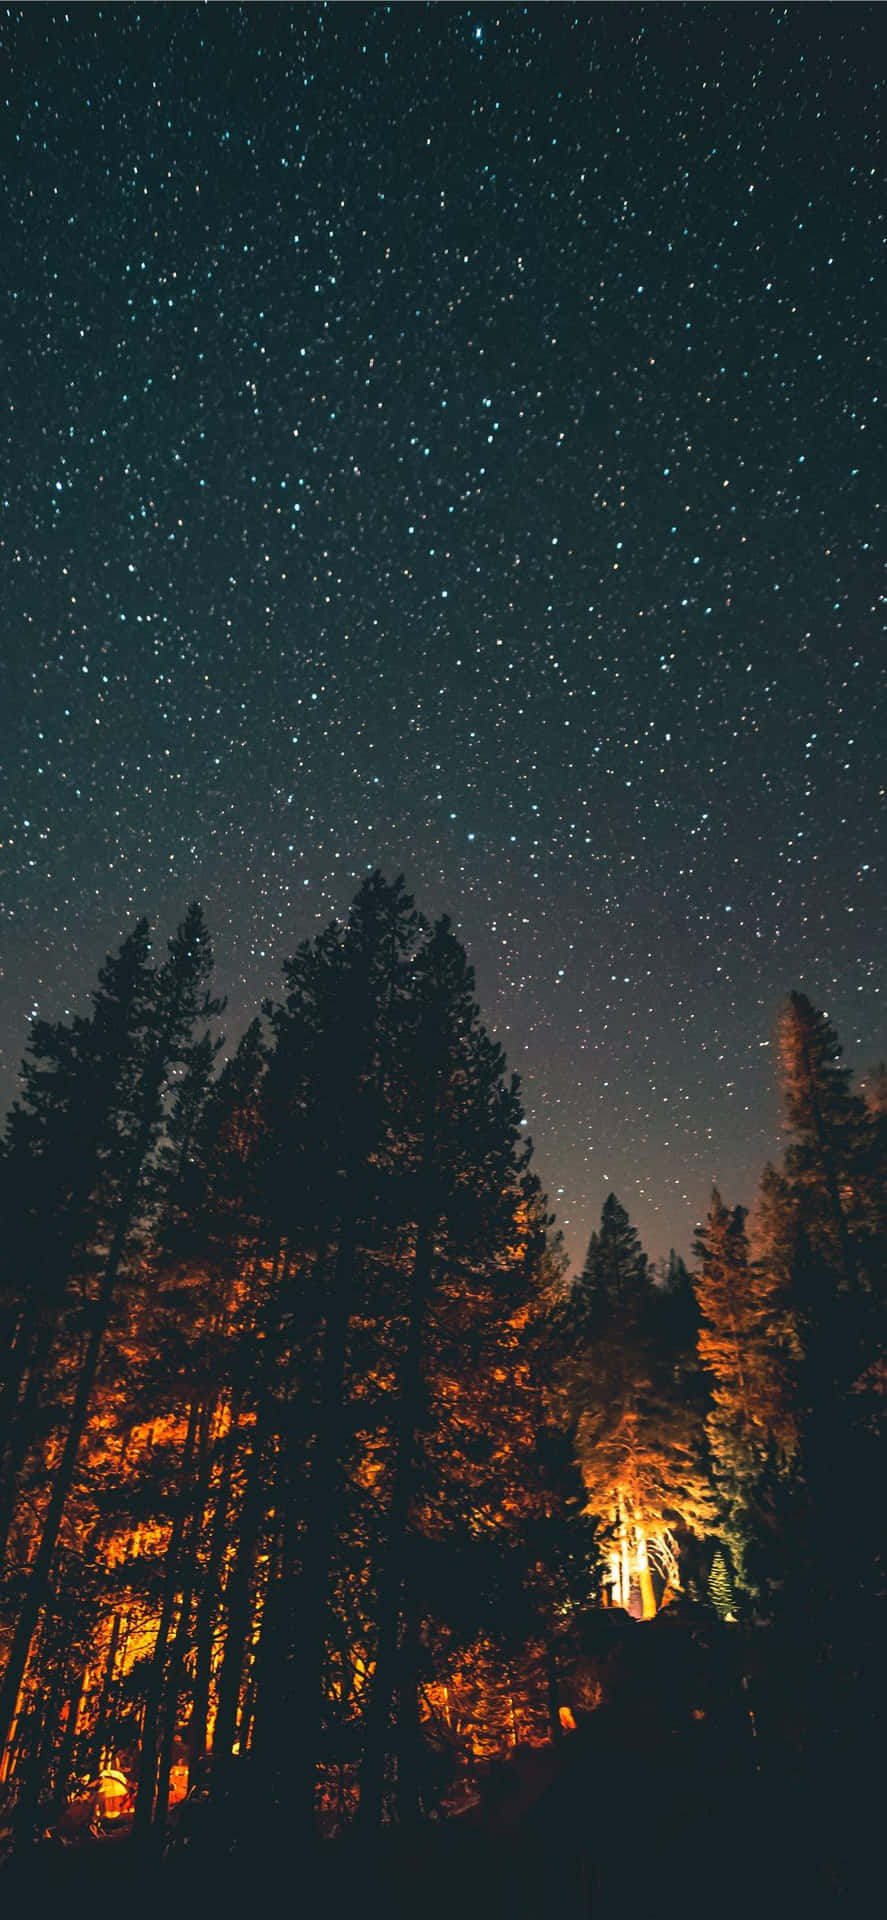 Forest With Starry Night Sky Nature Aesthetic Phone Wallpaper